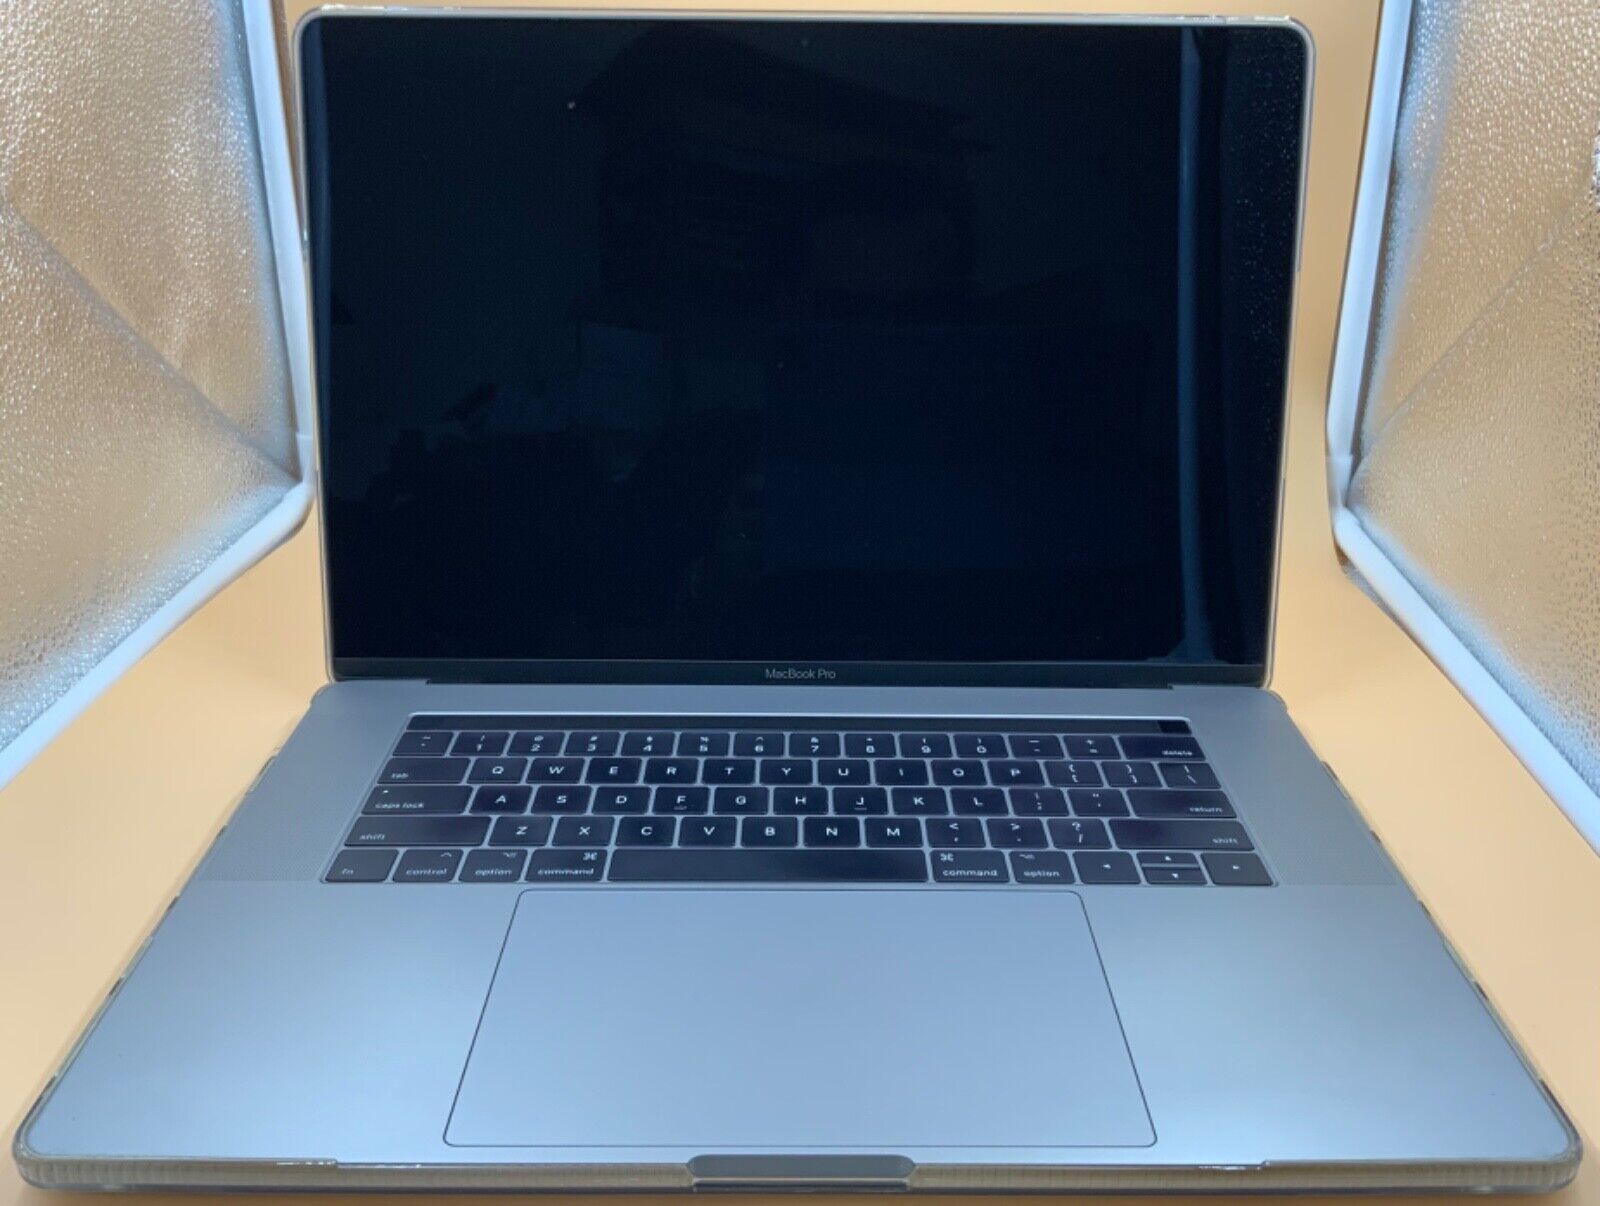 Apple MacBook Pro 15-inch 2017 2.8GHz Core i7 256GB 16GB Space Gray Laptop